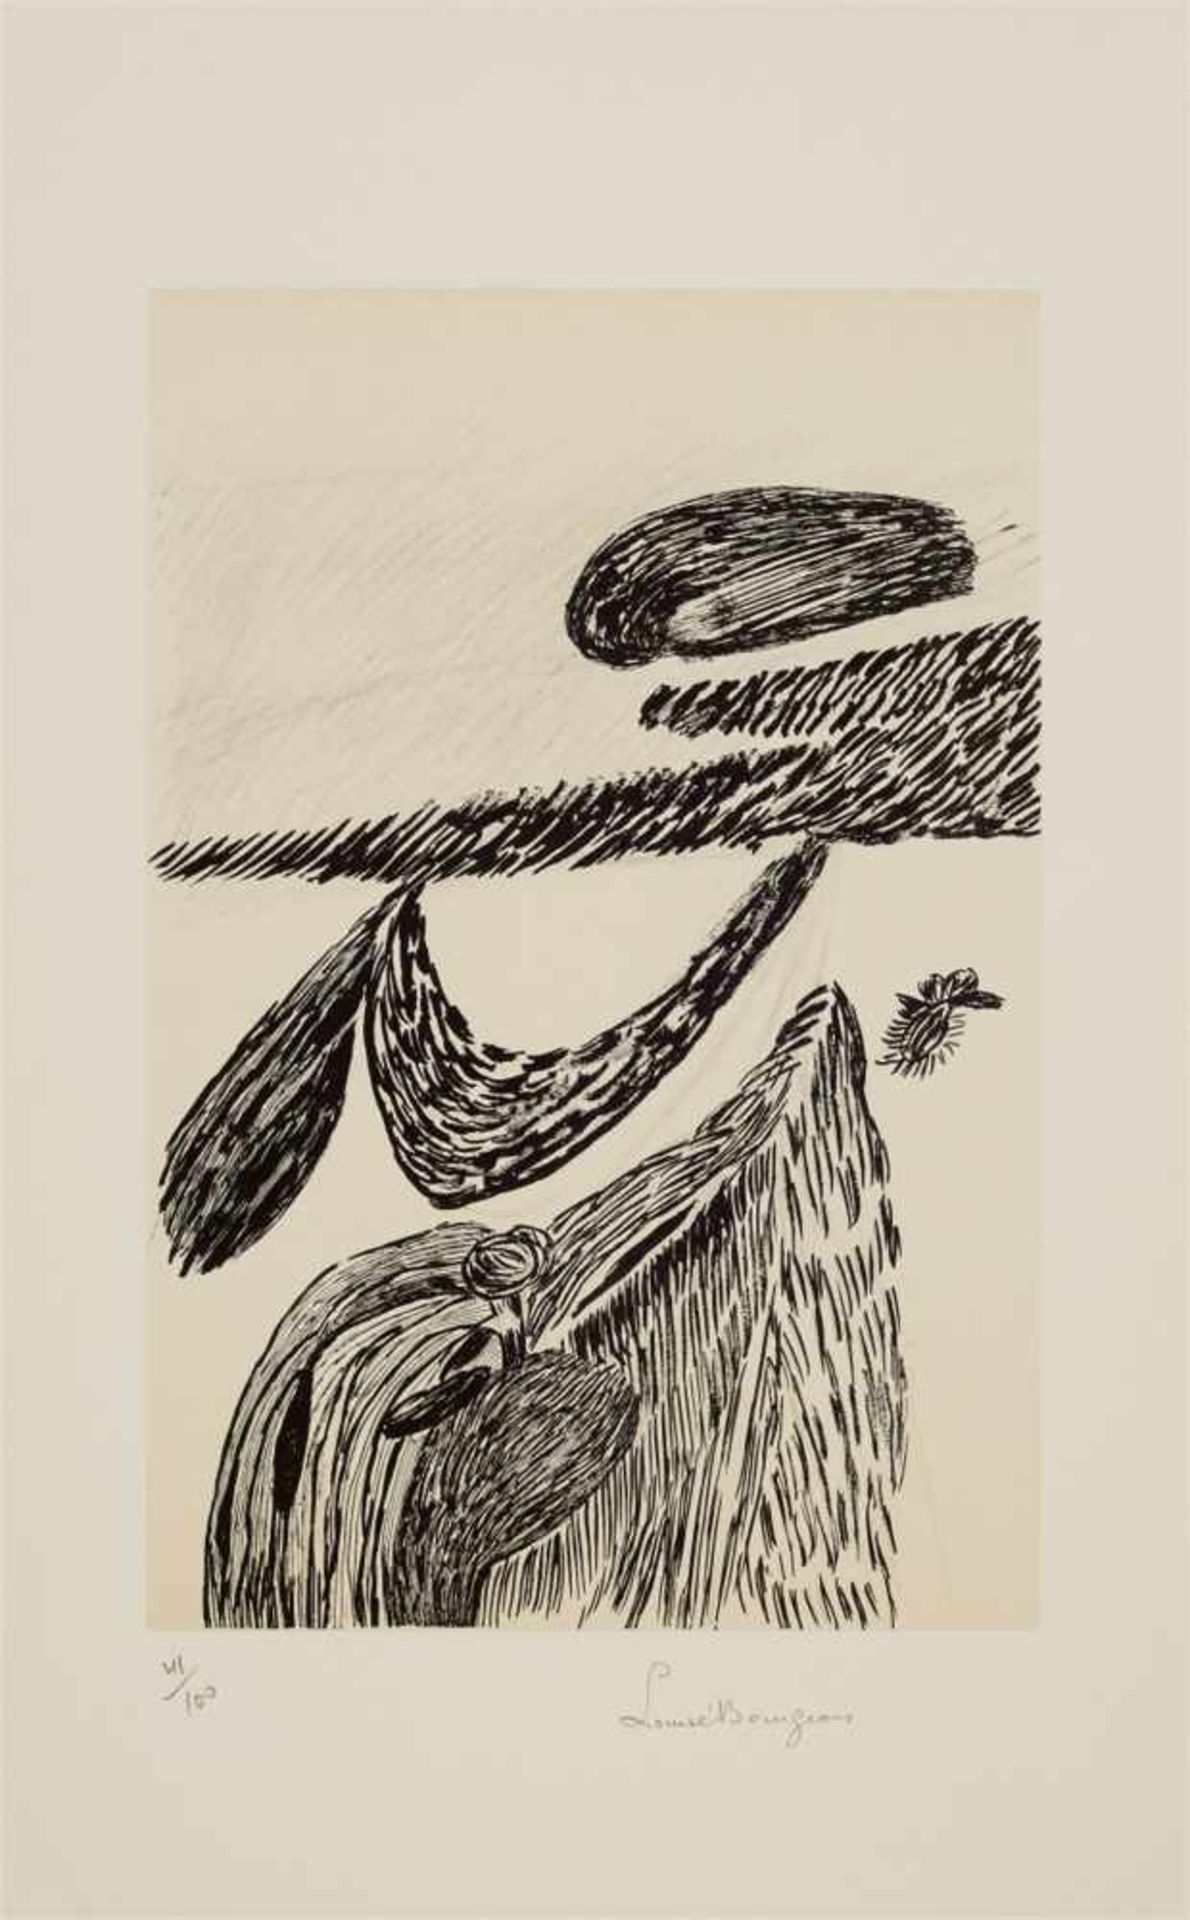 Louise BourgeoisInner LifeLithograph on card. 45.6 x 28.4 cm. Framed under glass. Signed and